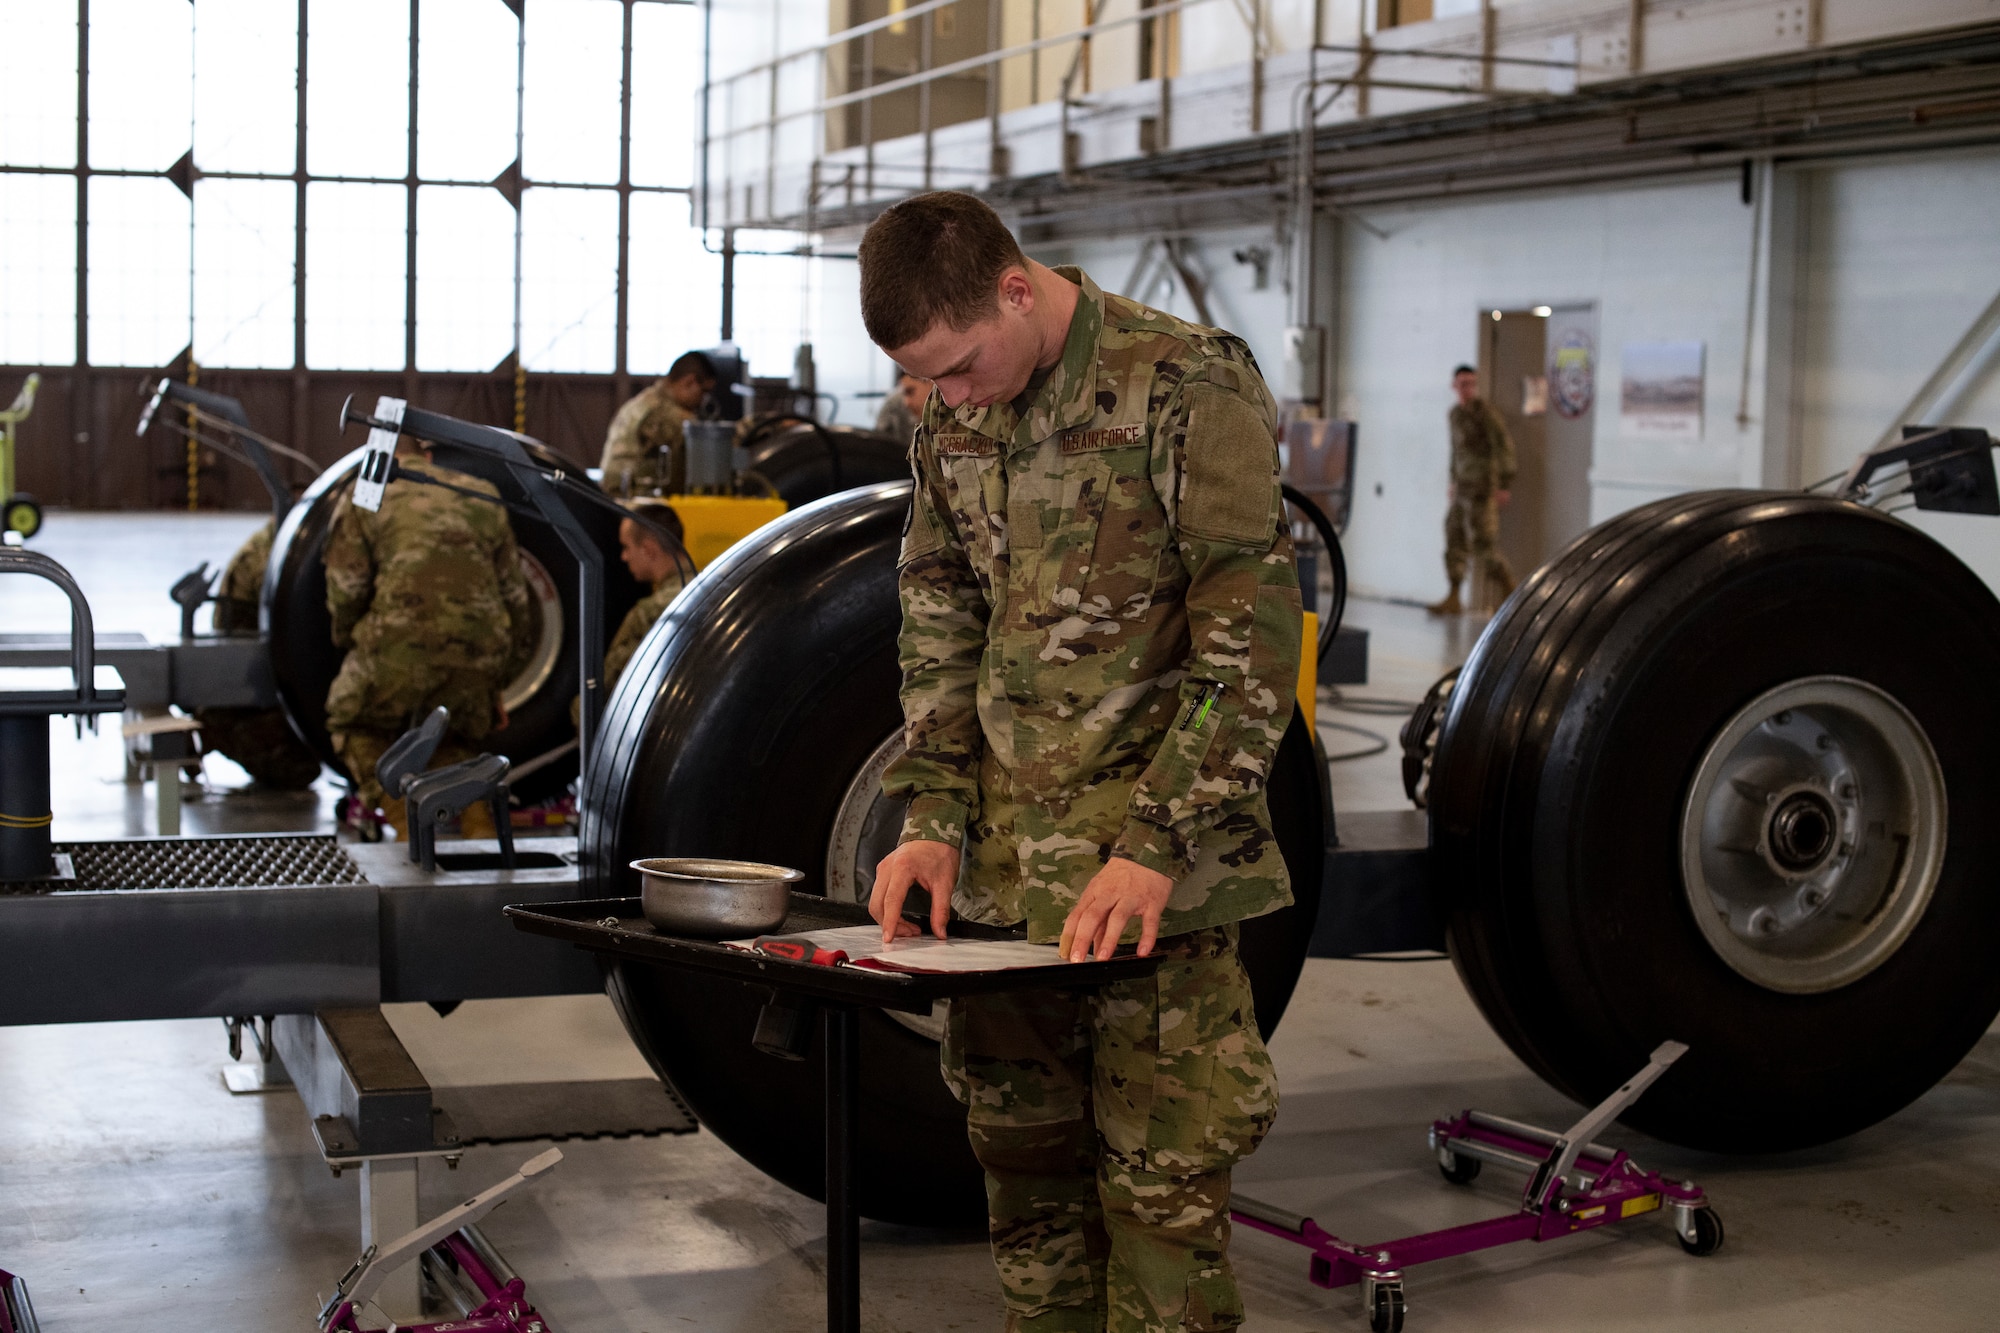 Airman Carter McCracken, a 362nd Training Squadron heavy crew chief student, reads through technical order instructions as he works through the wheel removal process on a landing gear trainer at Sheppard Air Force Base, Texas, March 3, 2020. McCracken and other students in his class were part of a test bed to gauge the effectiveness of using virtual, augmented and mixed realities to train Airmen in aircraft maintenance career fields. (U.S. Air Force photo by John Ingle)